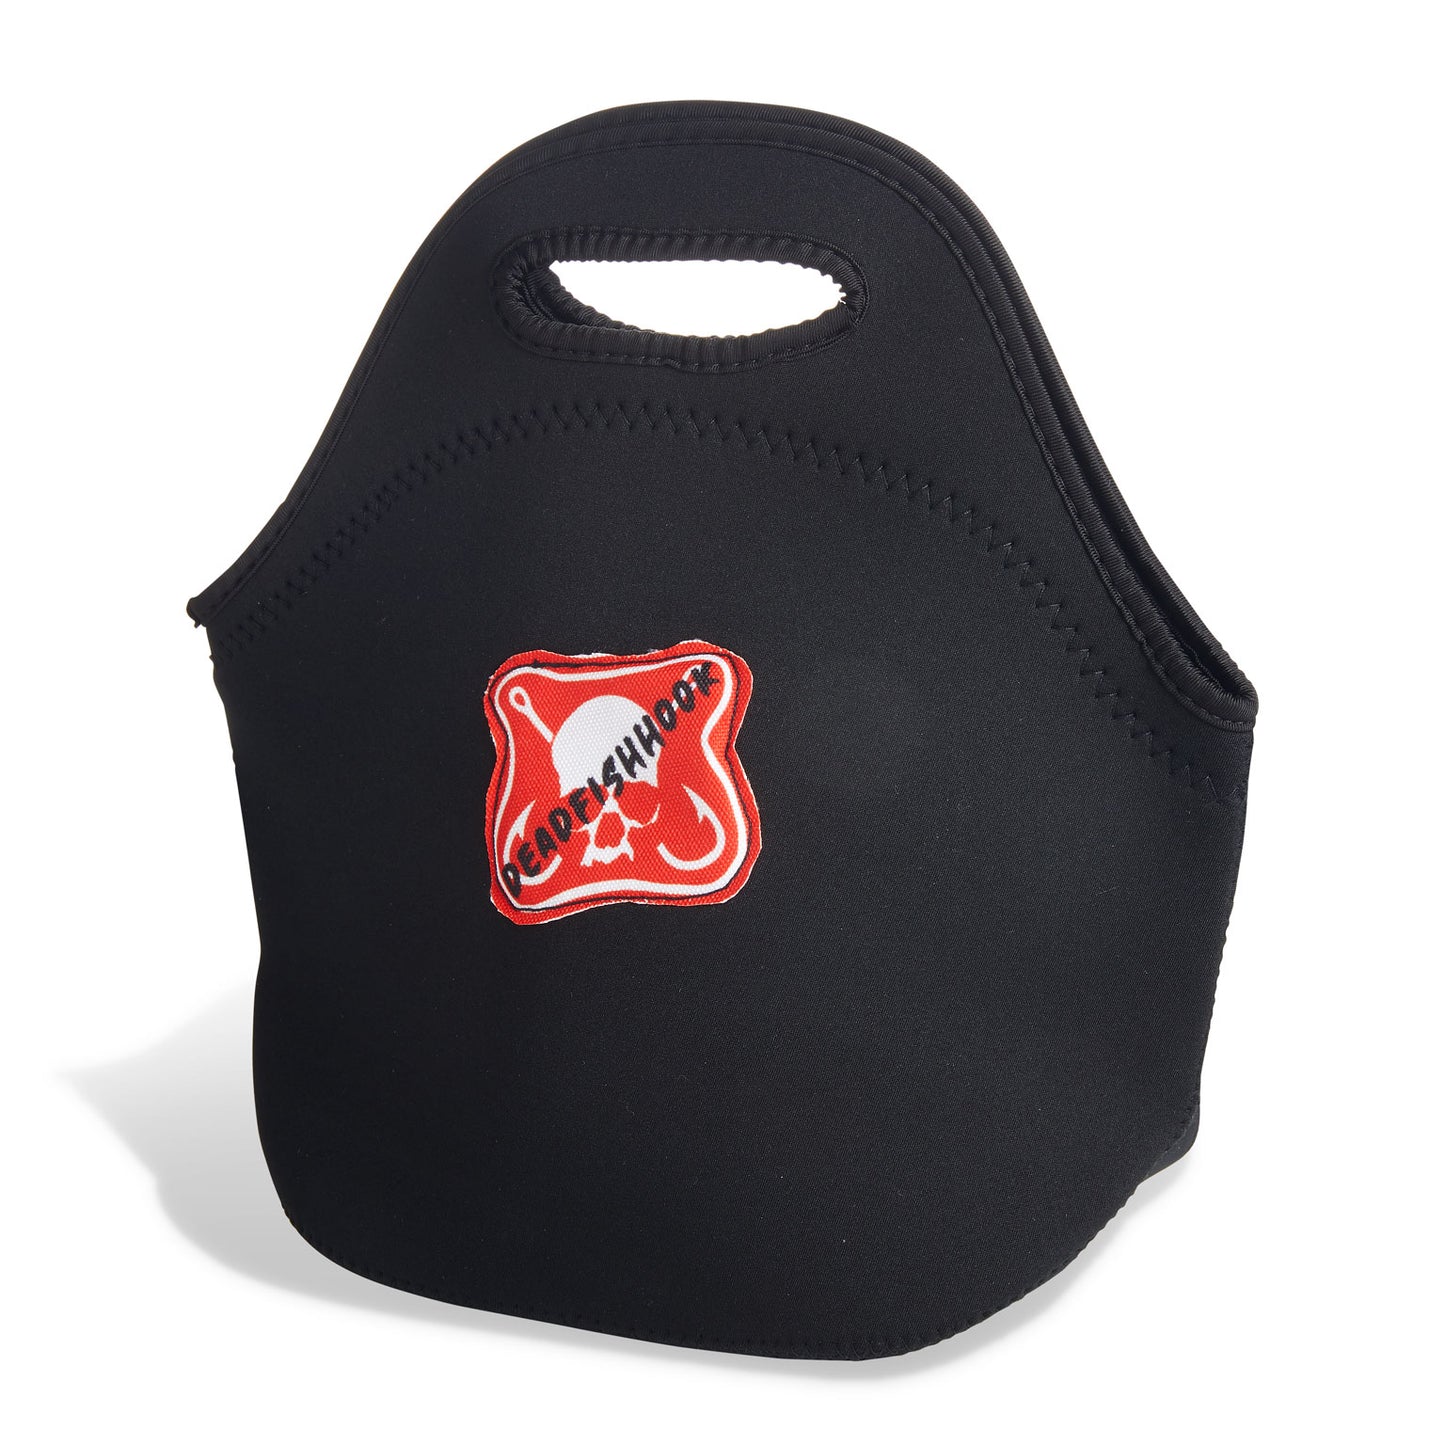 Dead Fish Hook Black Neoprene Tote with red brand patch in the center 